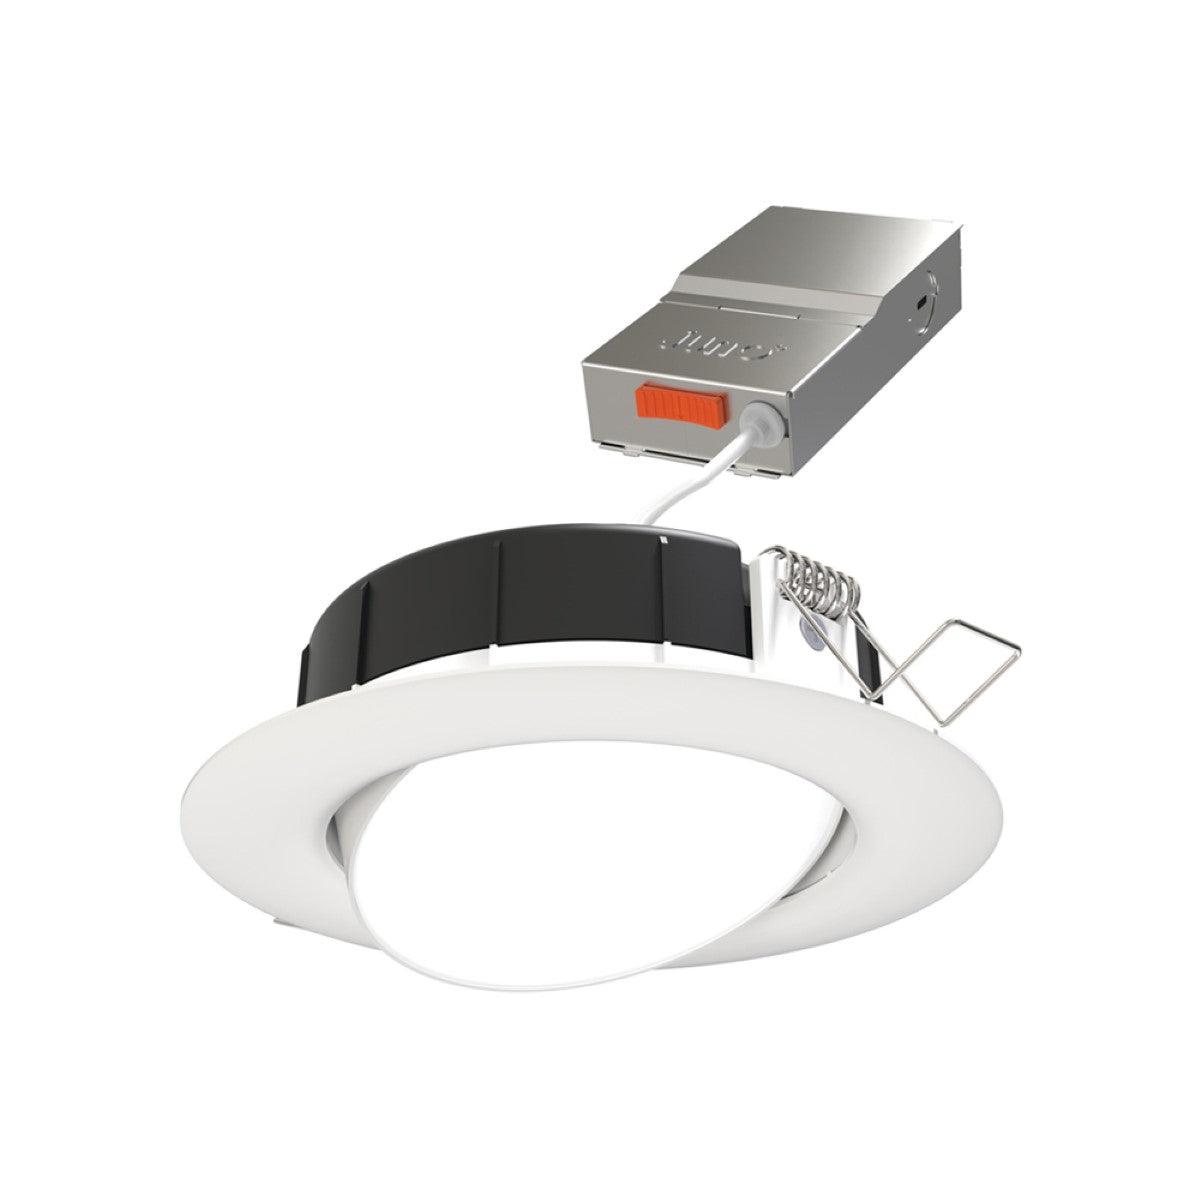 4 in. Wafer Adjustable LED Recessed Light, 700 Lumens ,Selectable CCT, 2700K to 5000K, White Finish